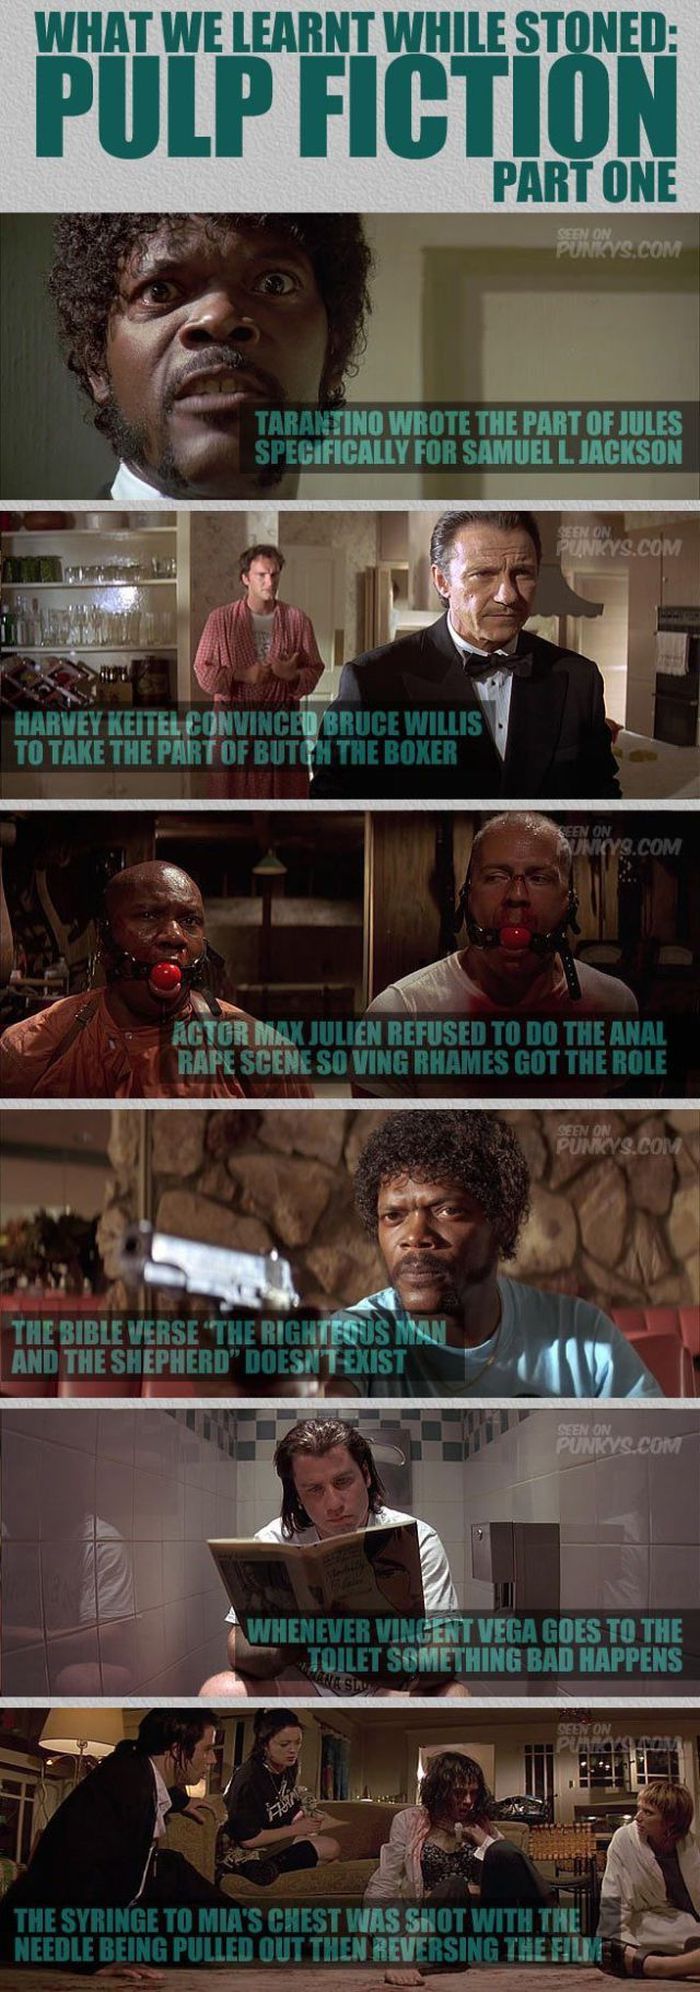 samuel l jackson pulp fiction - What We Learnt While Stoned Pulp Fiction Part One Seen On Punkys.Com Tarantino Wrote The Part Of Jules Specifically For Samuel L. Jackson Seen On Punkys.Com Harvey Keitel ConvincedBruce Willis To Take The Part Of Butgh The 